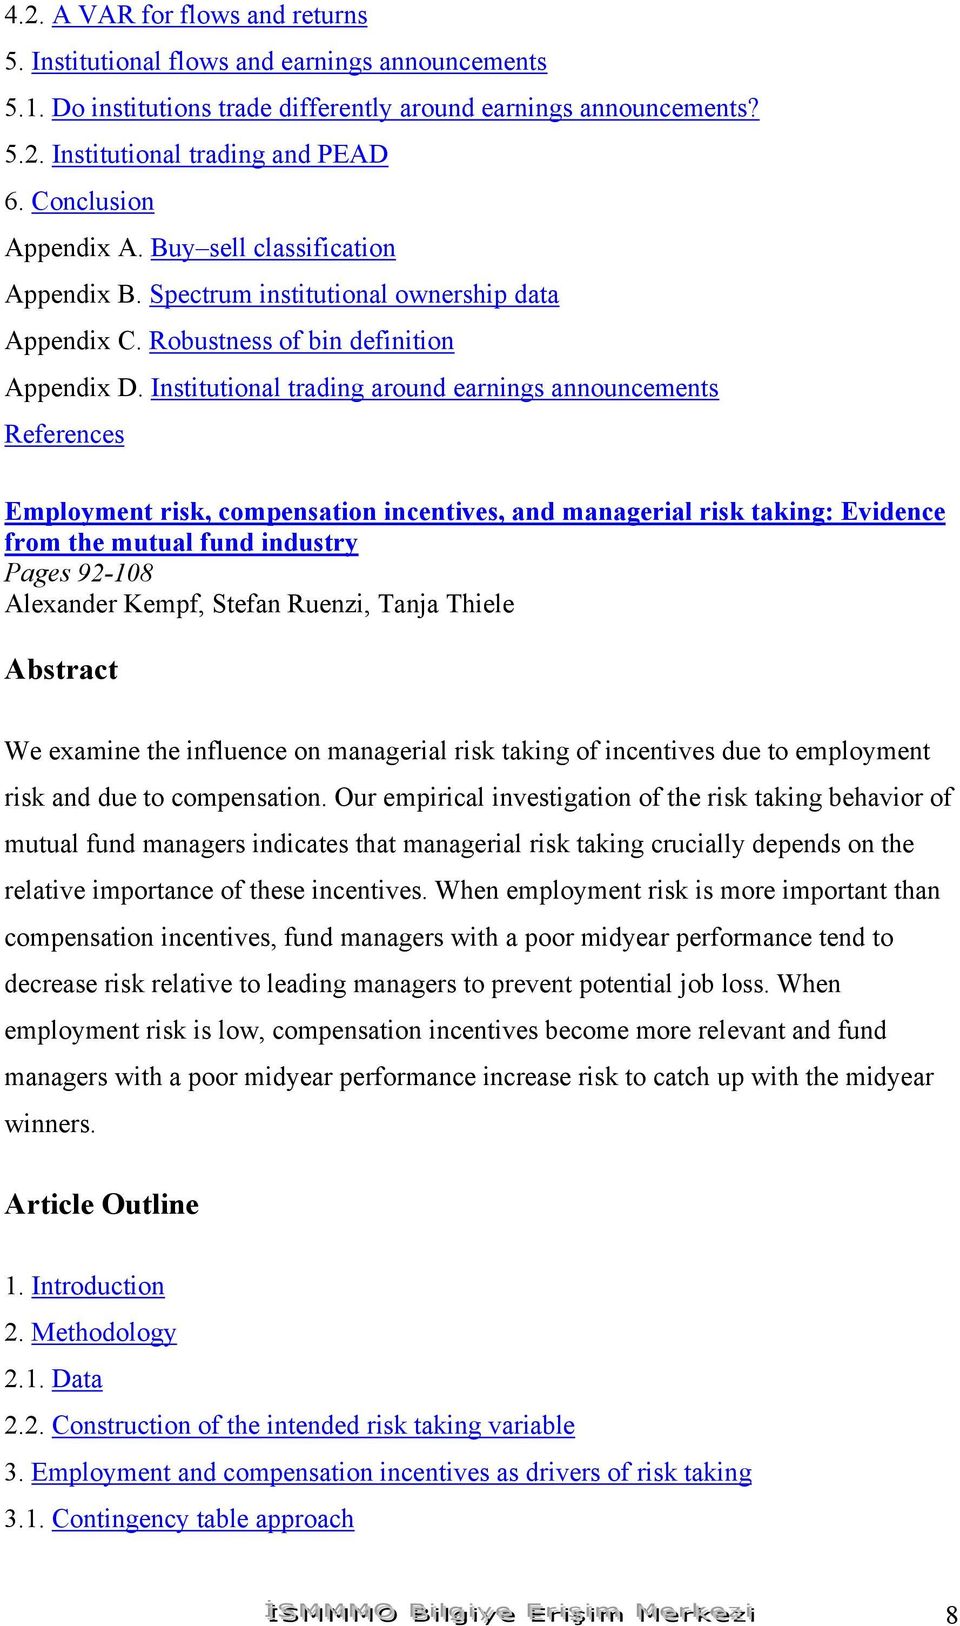 Institutional trading around earnings announcements Employment risk, compensation incentives, and managerial risk taking: Evidence from the mutual fund industry Pages 92-108 Alexander Kempf, Stefan